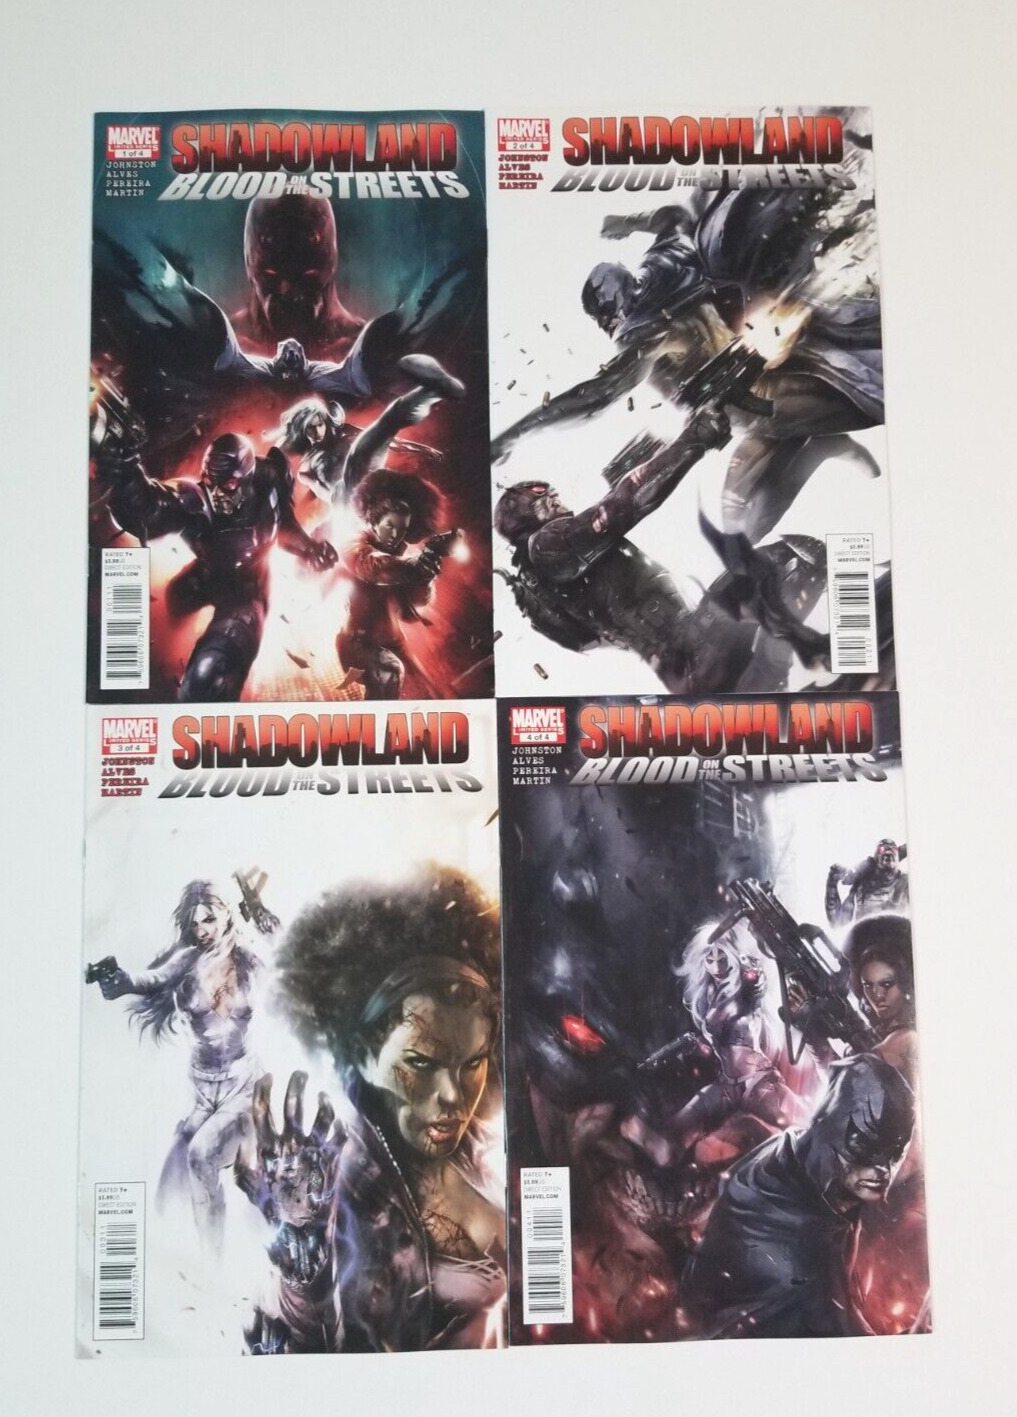 Shadowland: Blood on the Streets #1-4 (2010 Marvel Comics) 1 2 3 4 Complete Set